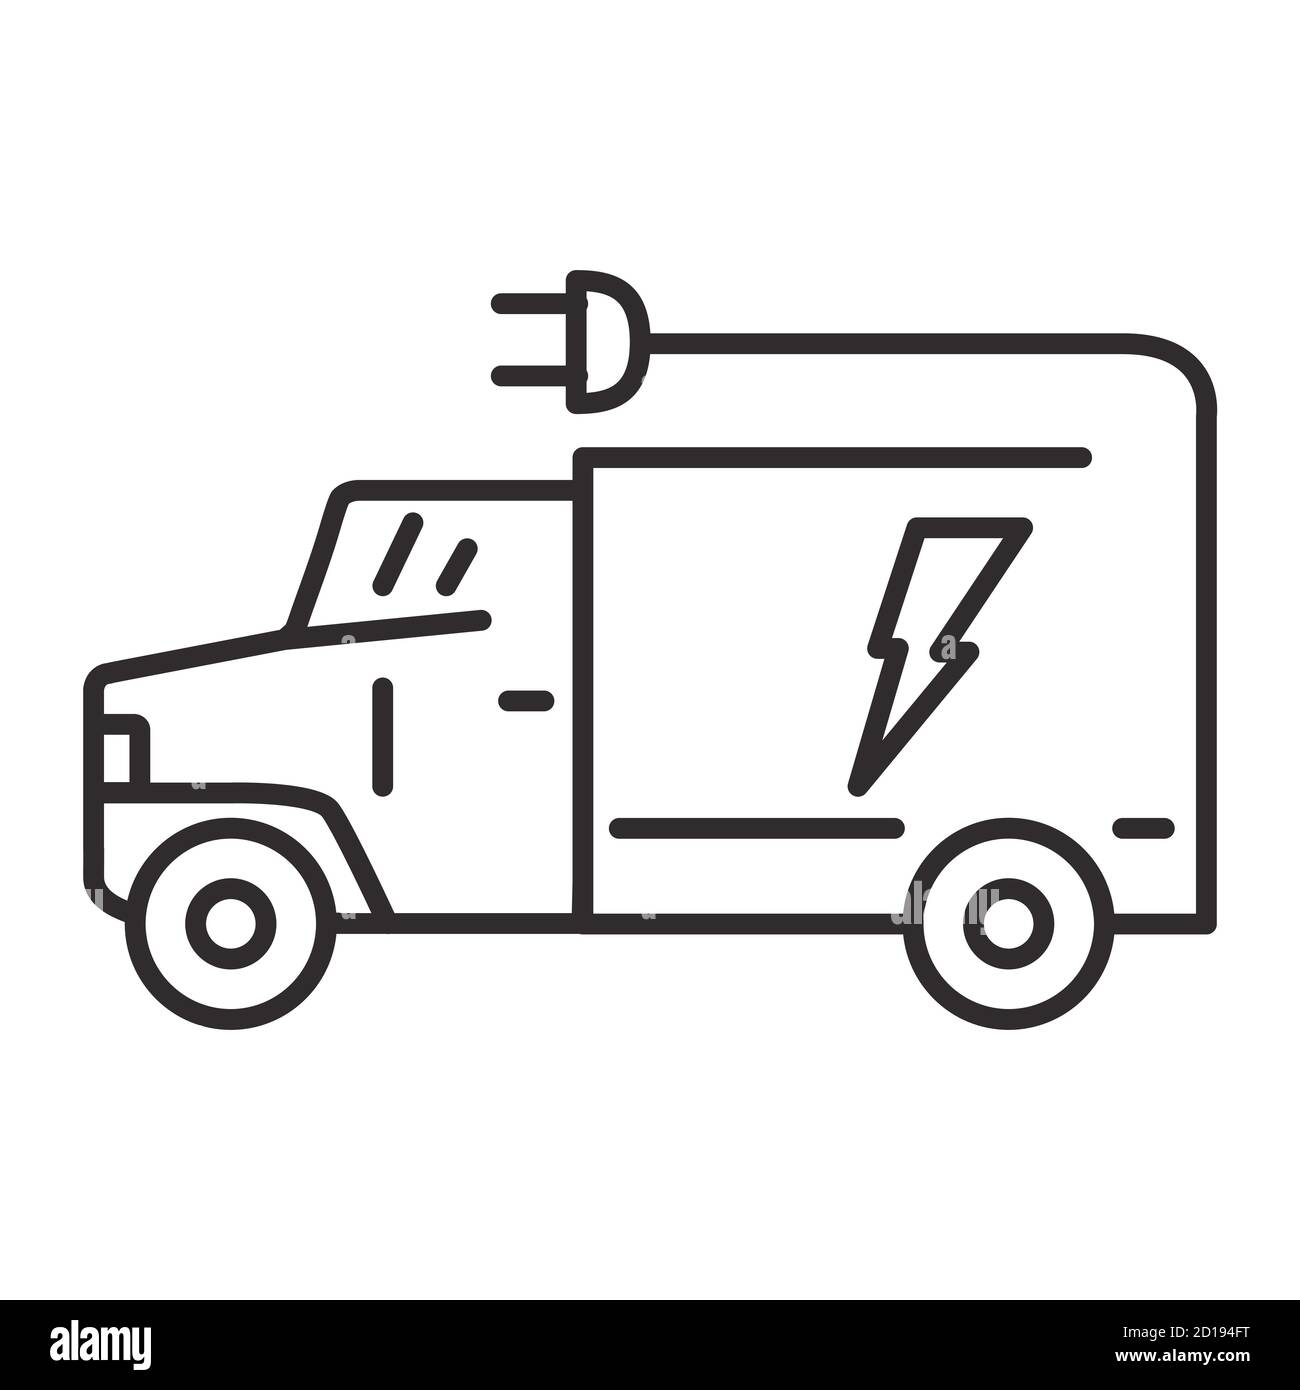 Truck icon electric plug. Isolated on white background. Stock Vector